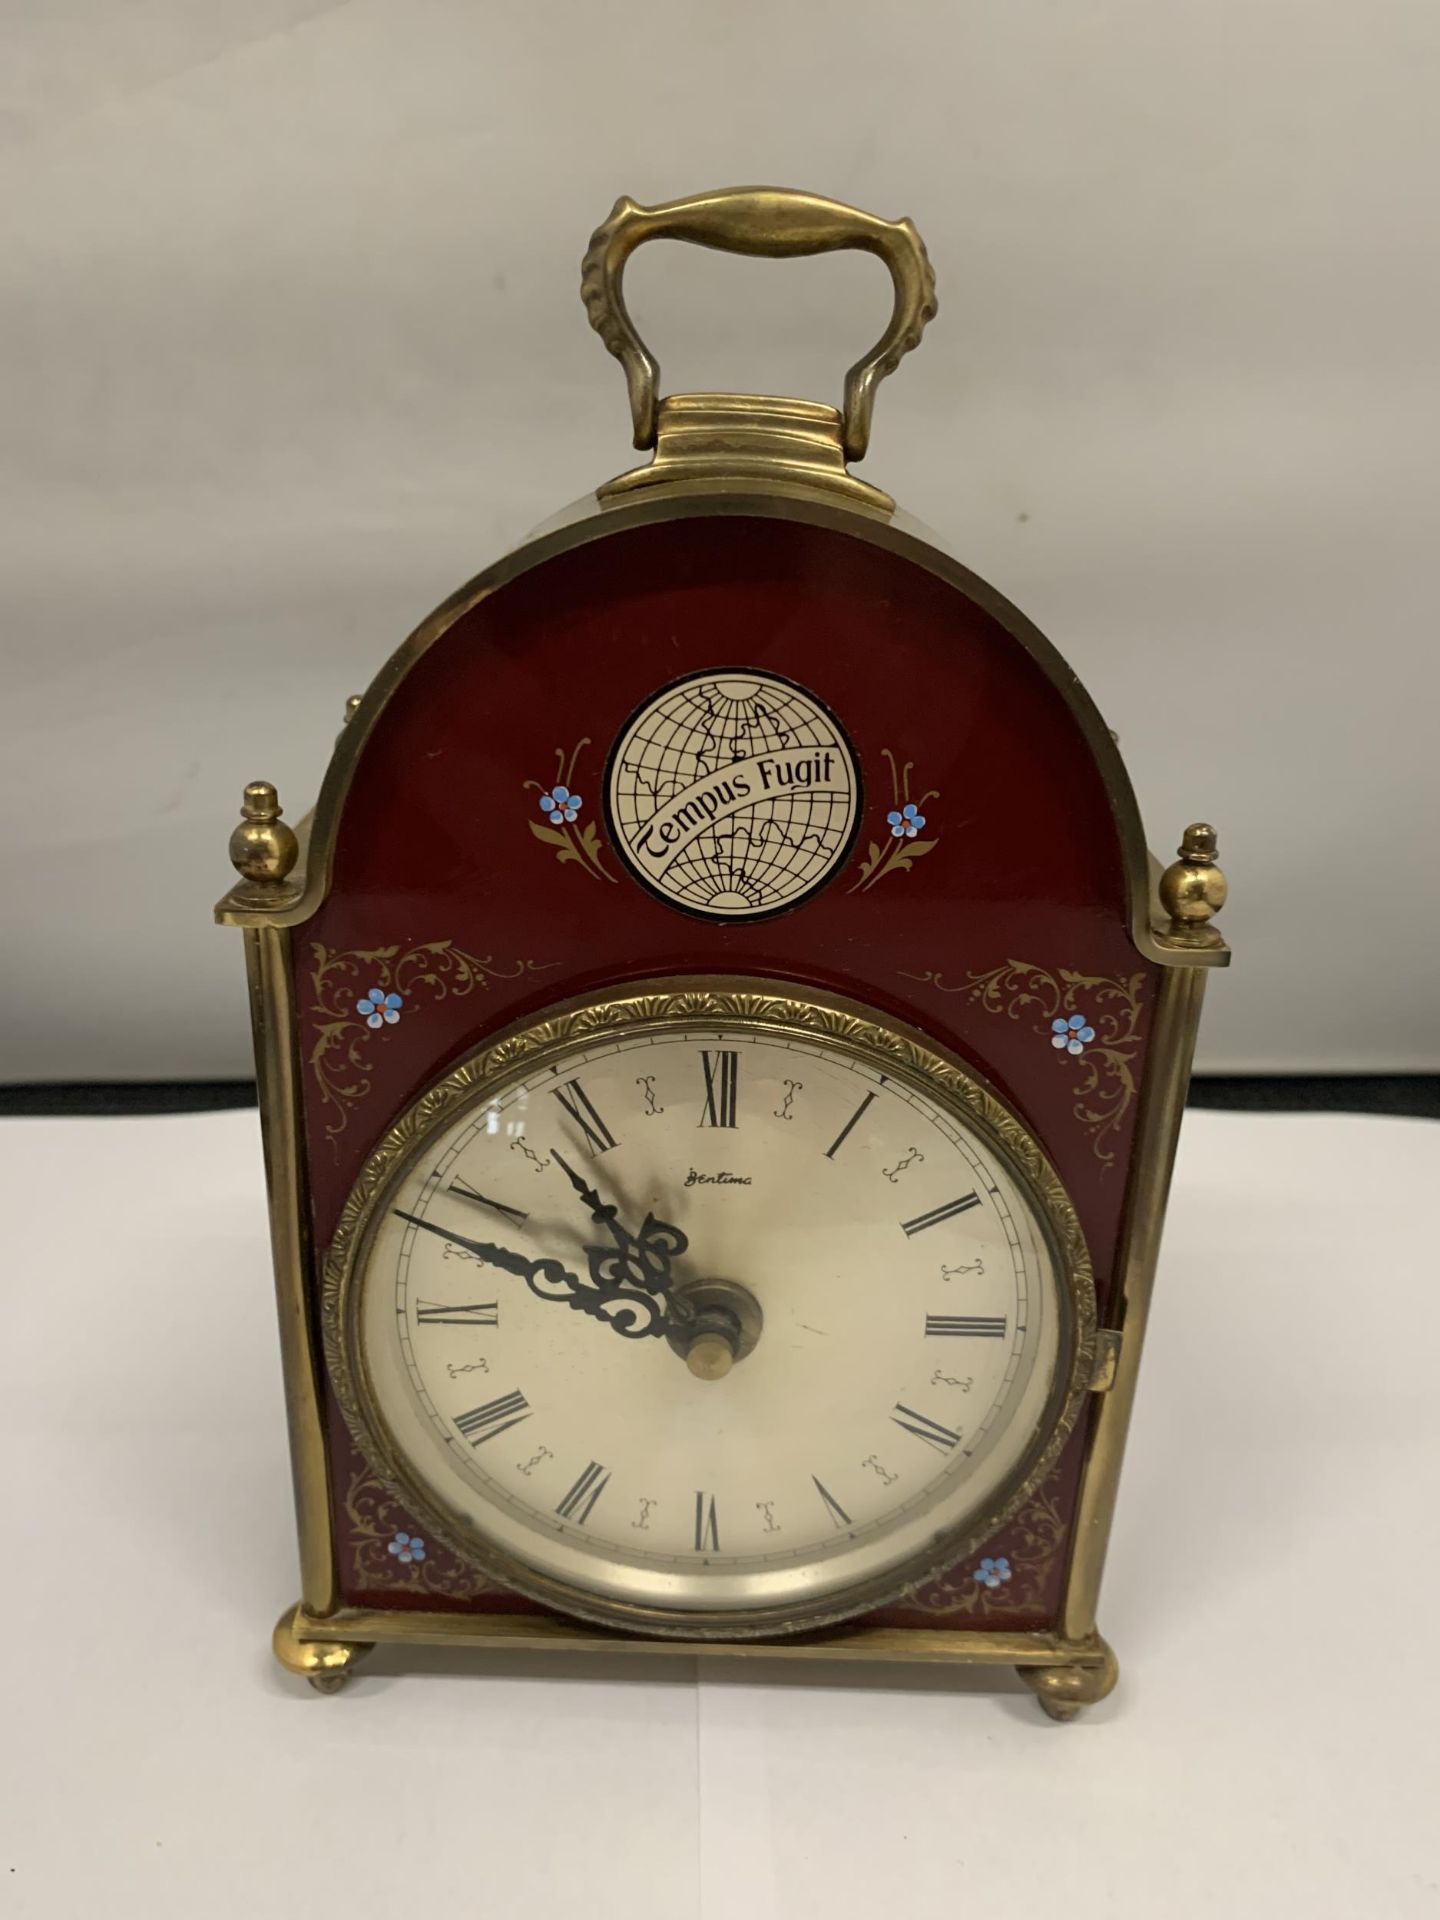 A 'BENTIMA' BRASS MANTLE CLOCK WITH A BURGUNDY AND FLORAL DECORATED FRONT HEIGHT 18CM